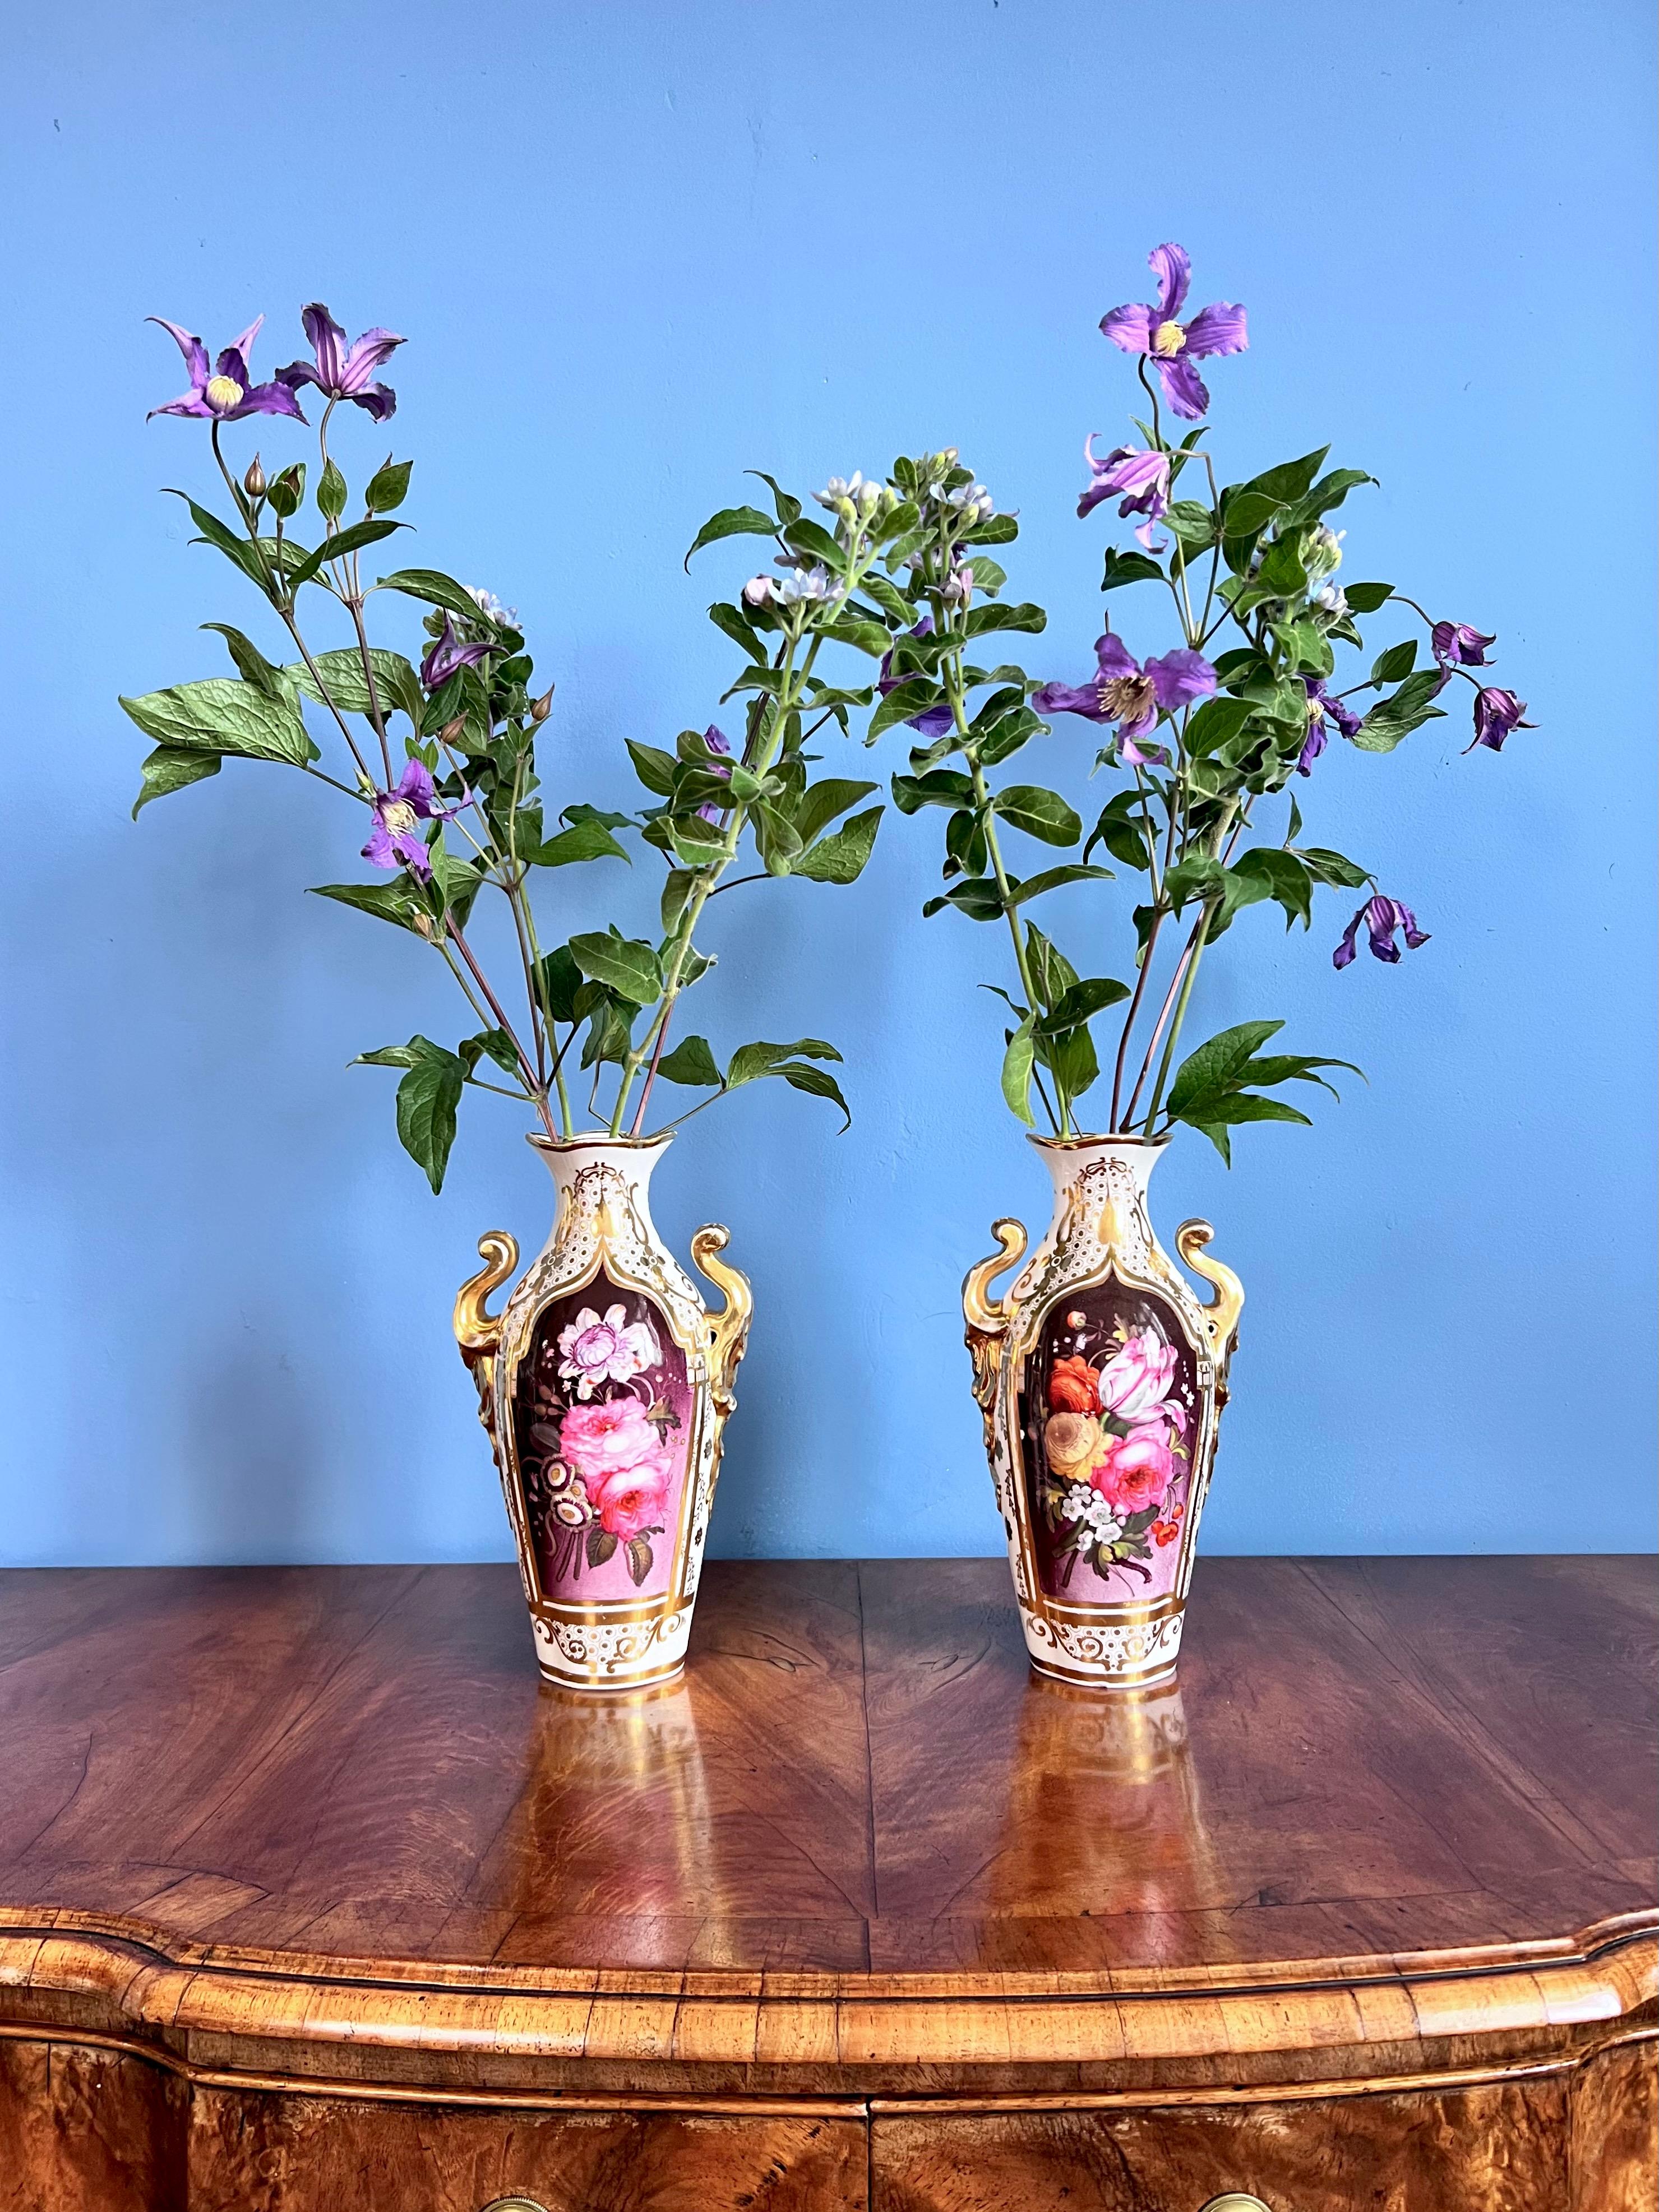 This is a stunning and very rare pair of vases made by Coalport in around 1845. The vases have rich gilding in the Persian Revival style, combined with very English floral reserves of freely painted flower bouquets on a puce ground. Incorporated